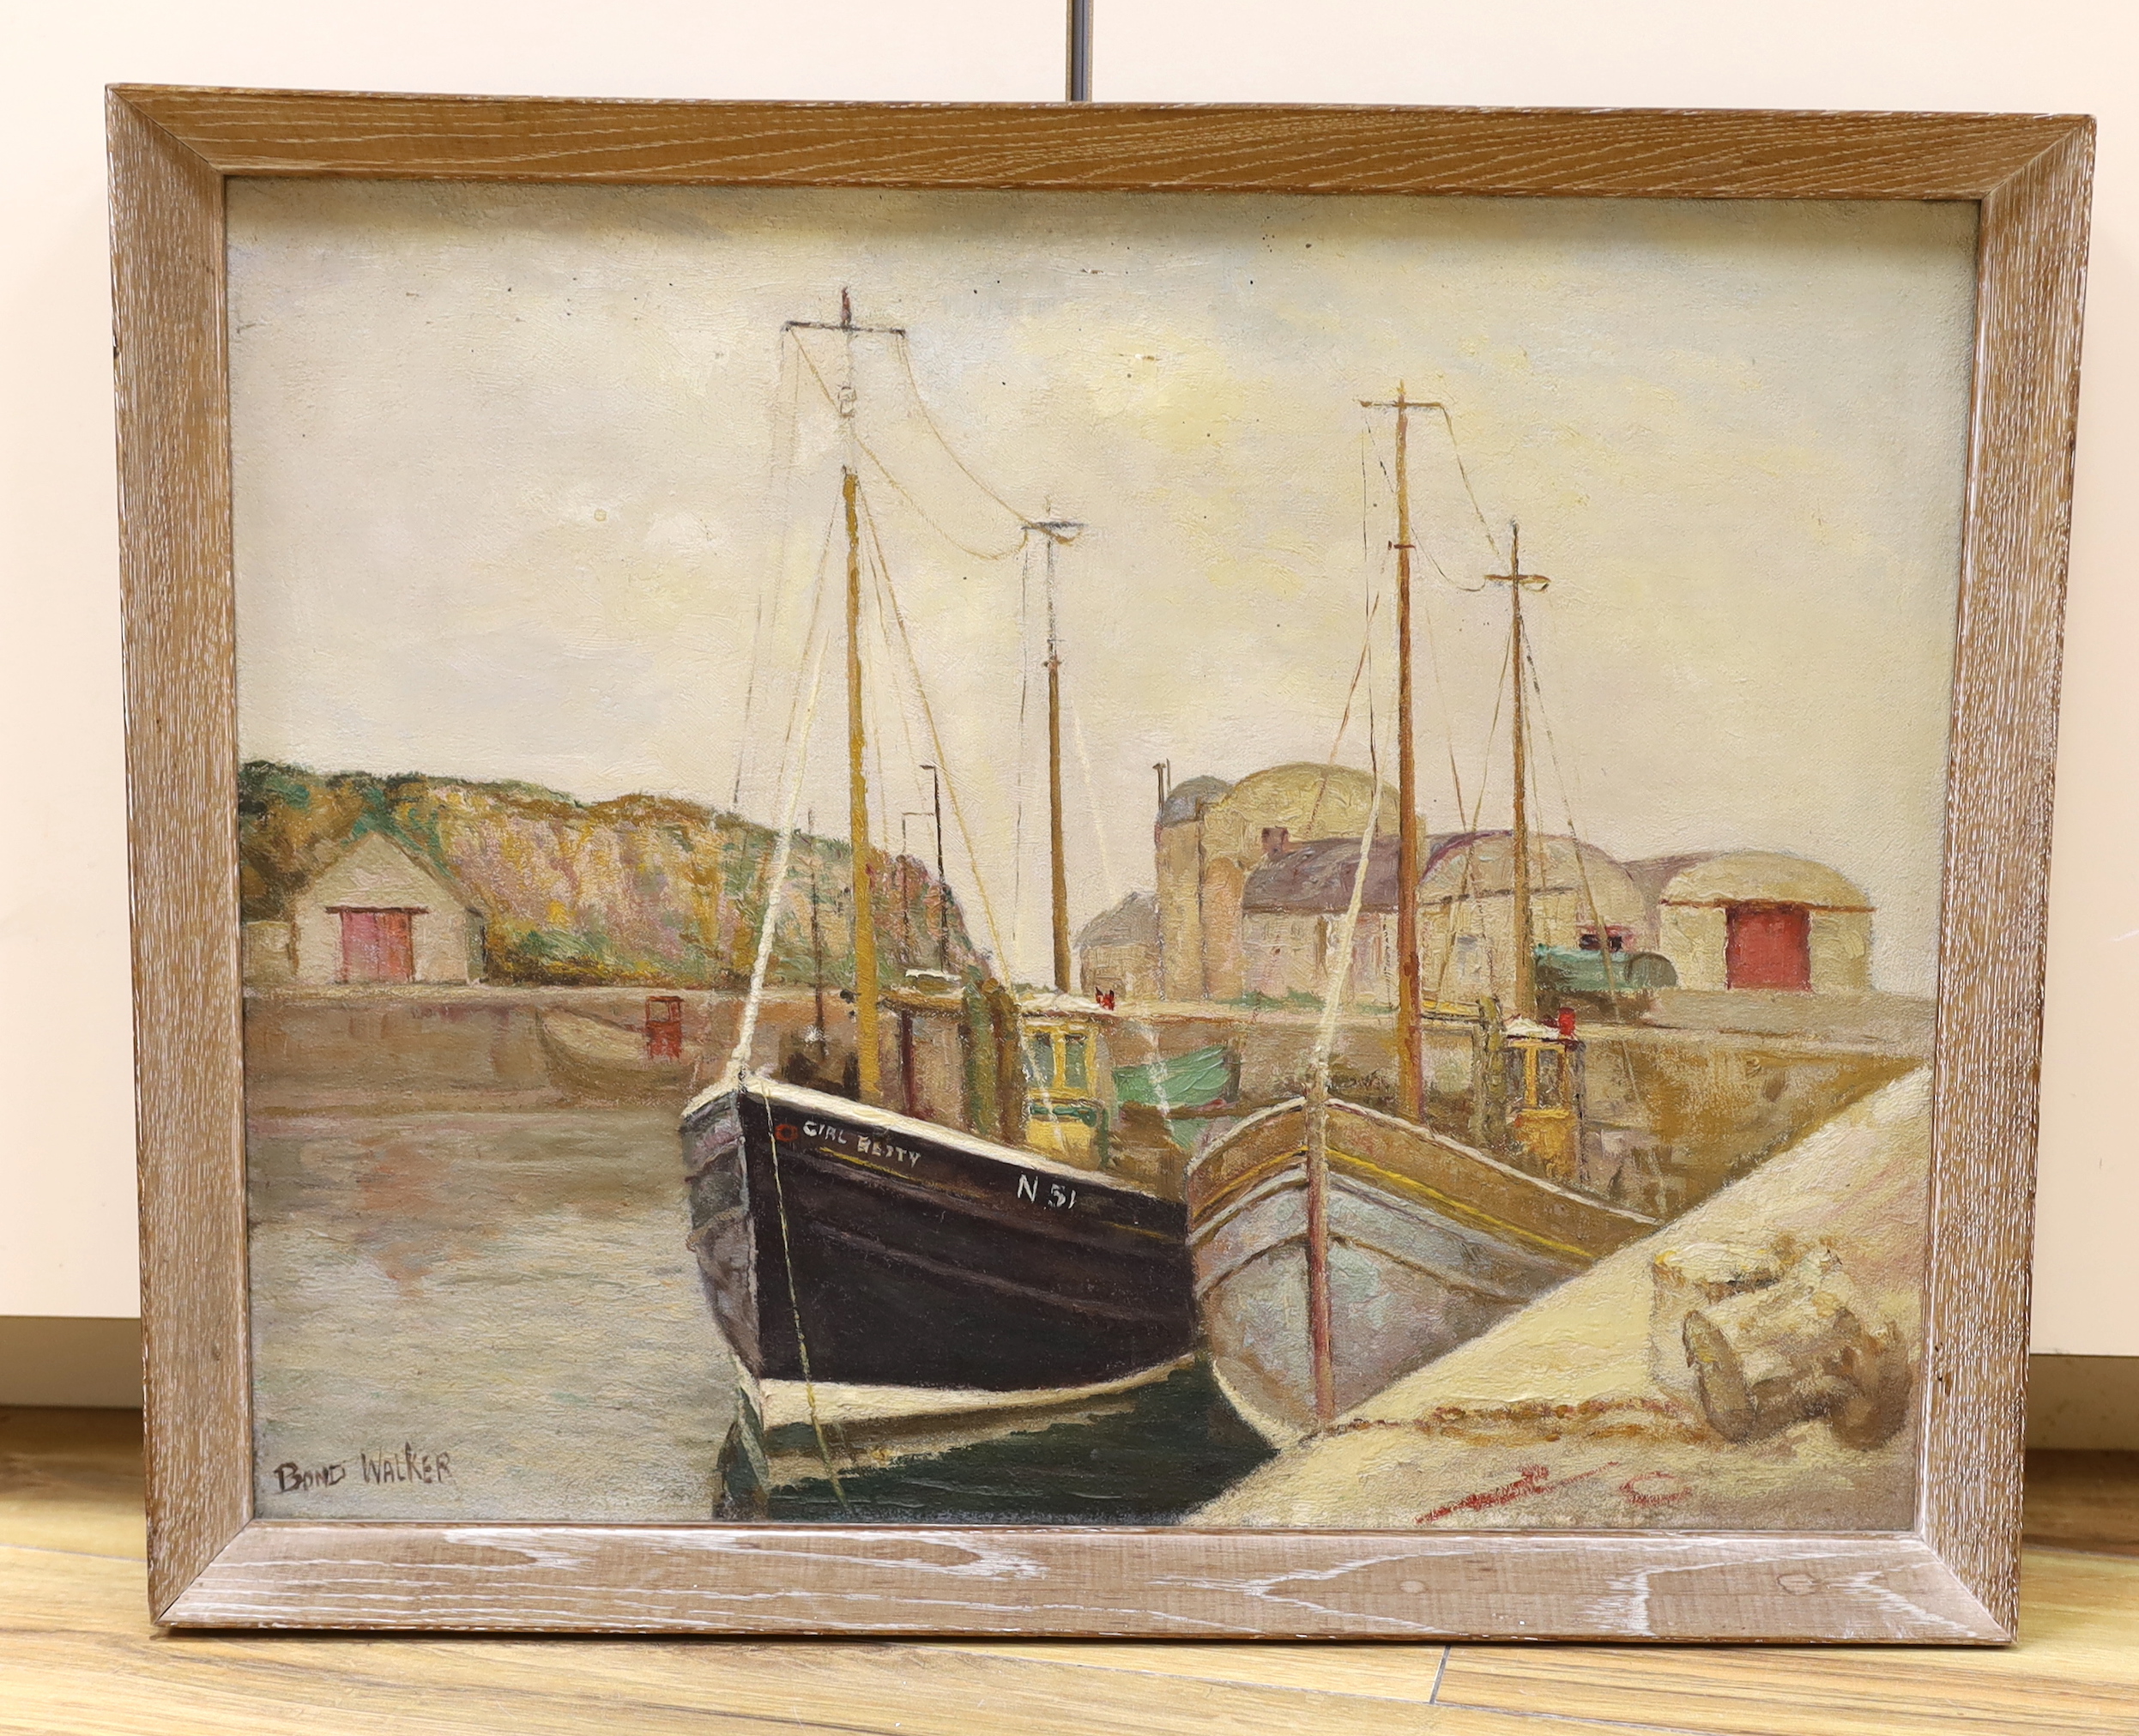 David Bond Walker (1891-1977), oil on canvas, Coastal harbour with moored fishing boats, signed, 40 x 50cm